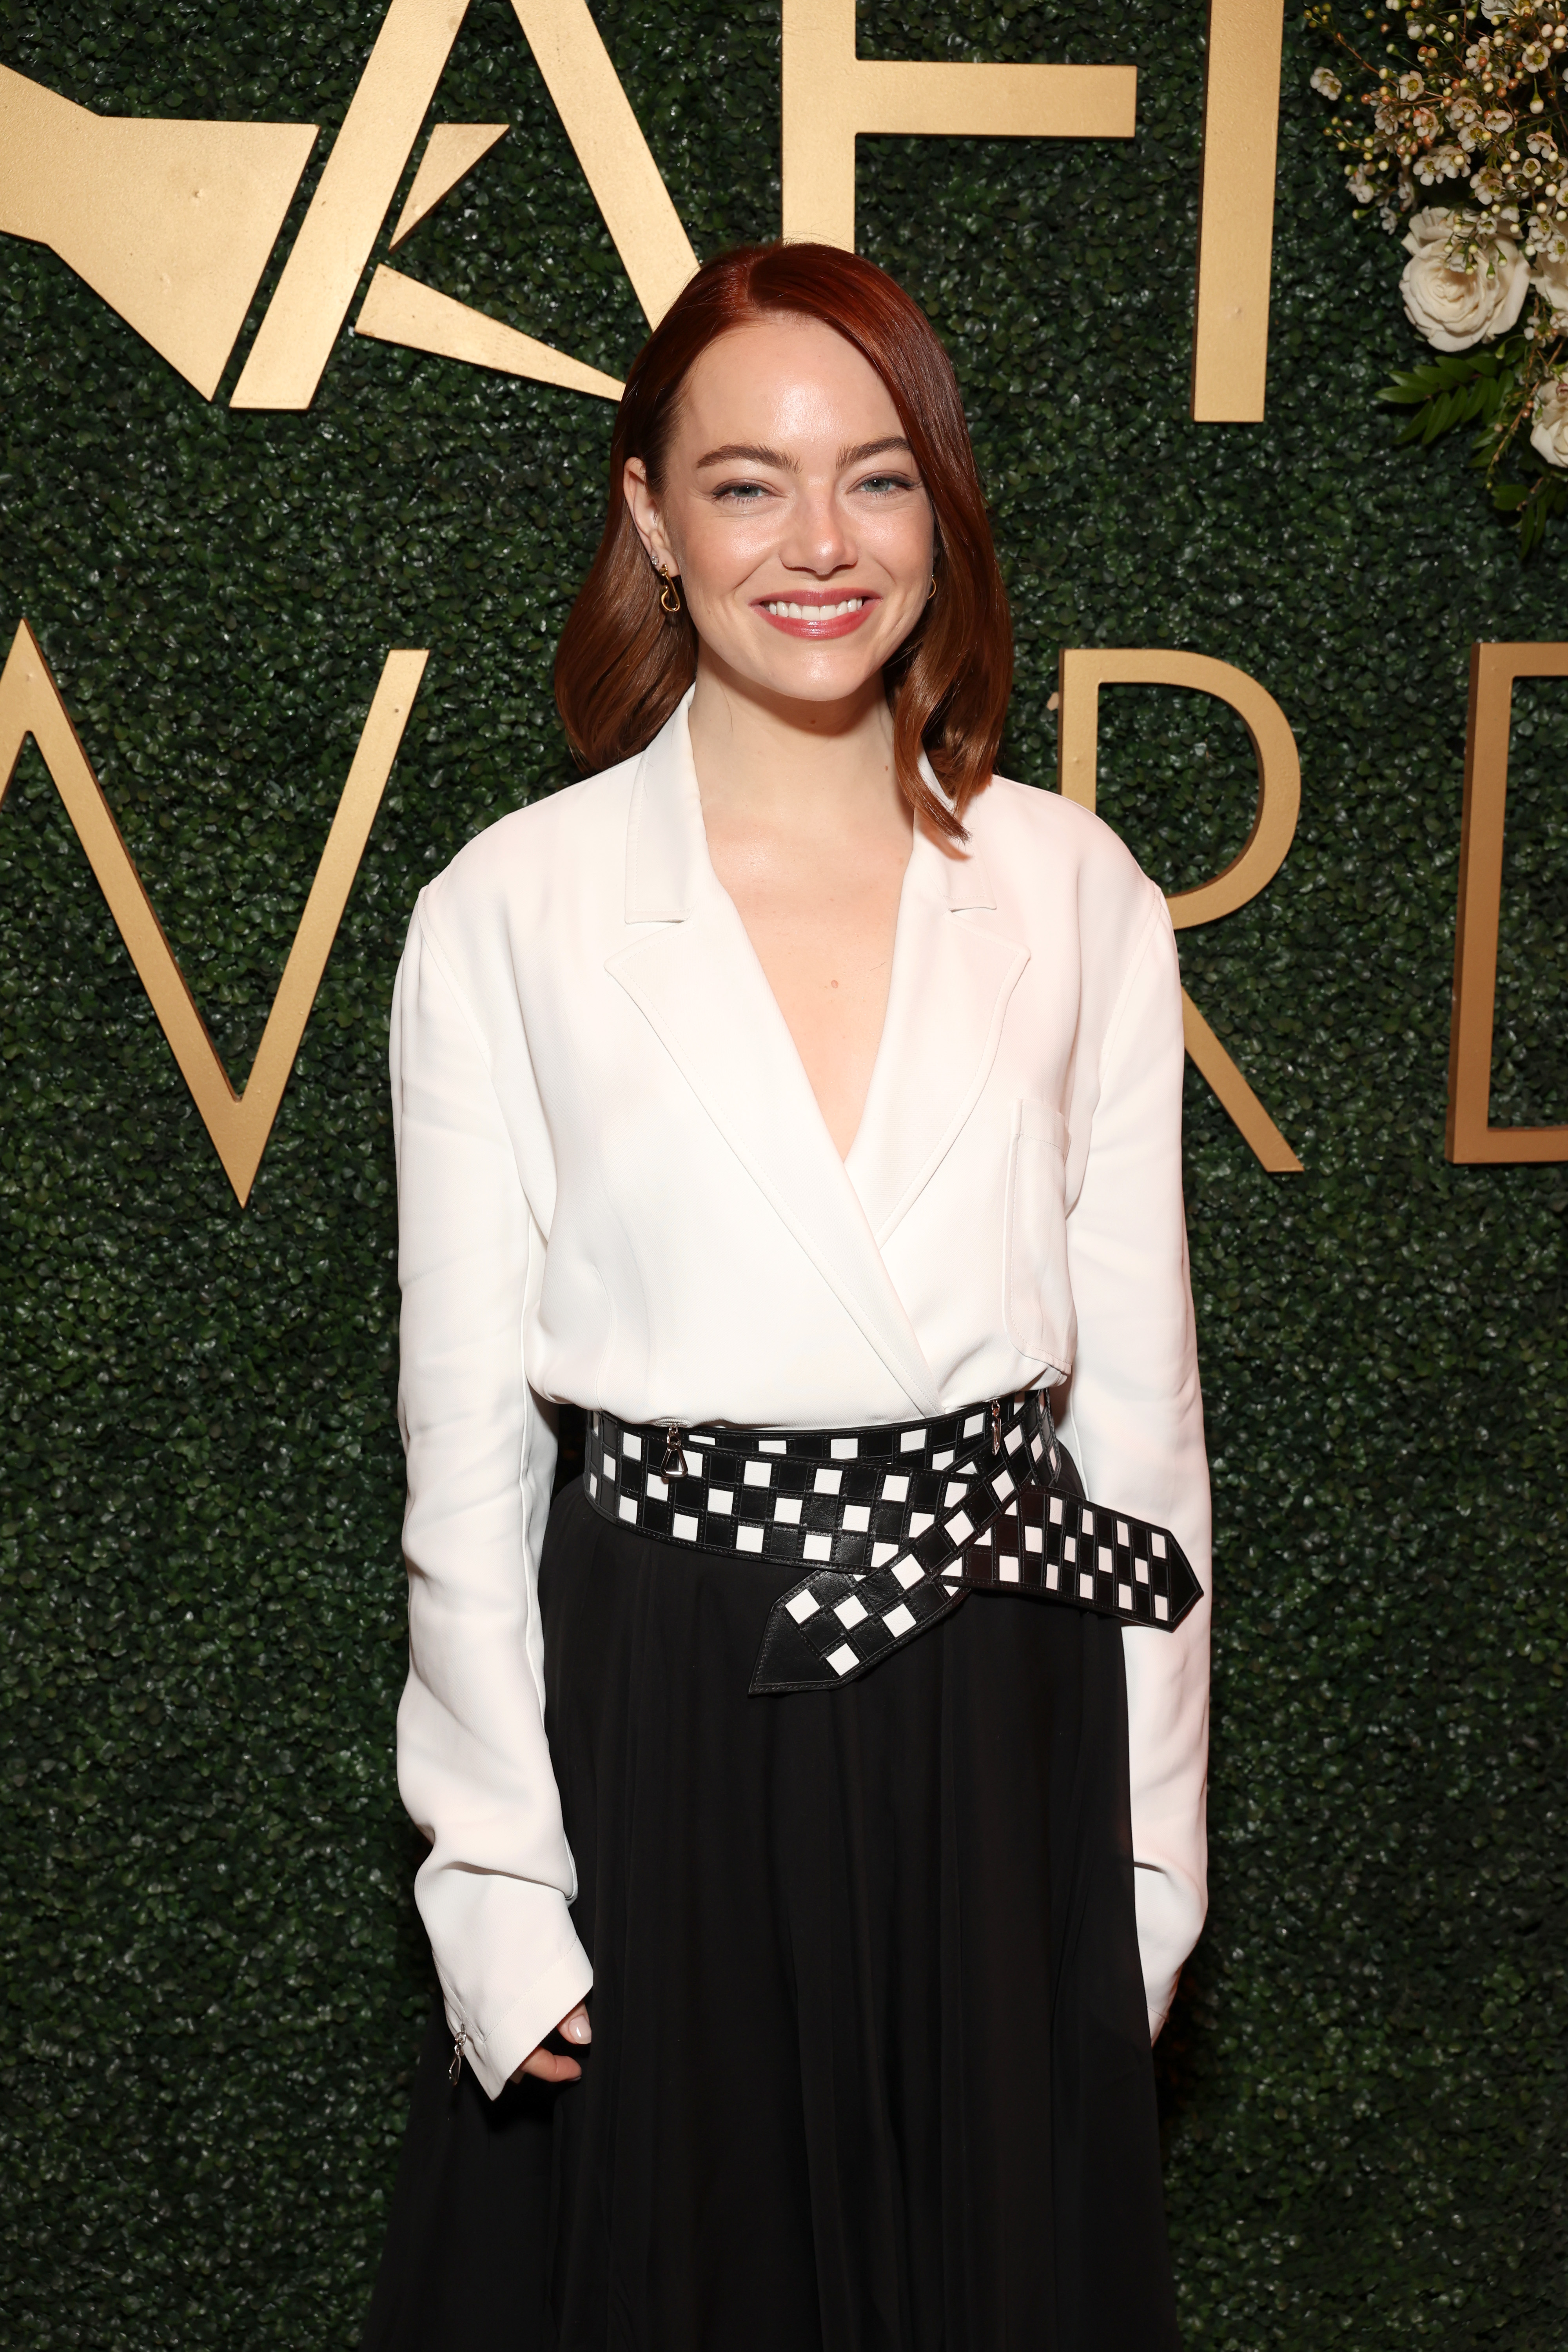 Emma Stone has shared her desire to be a Jeopardy! contestant